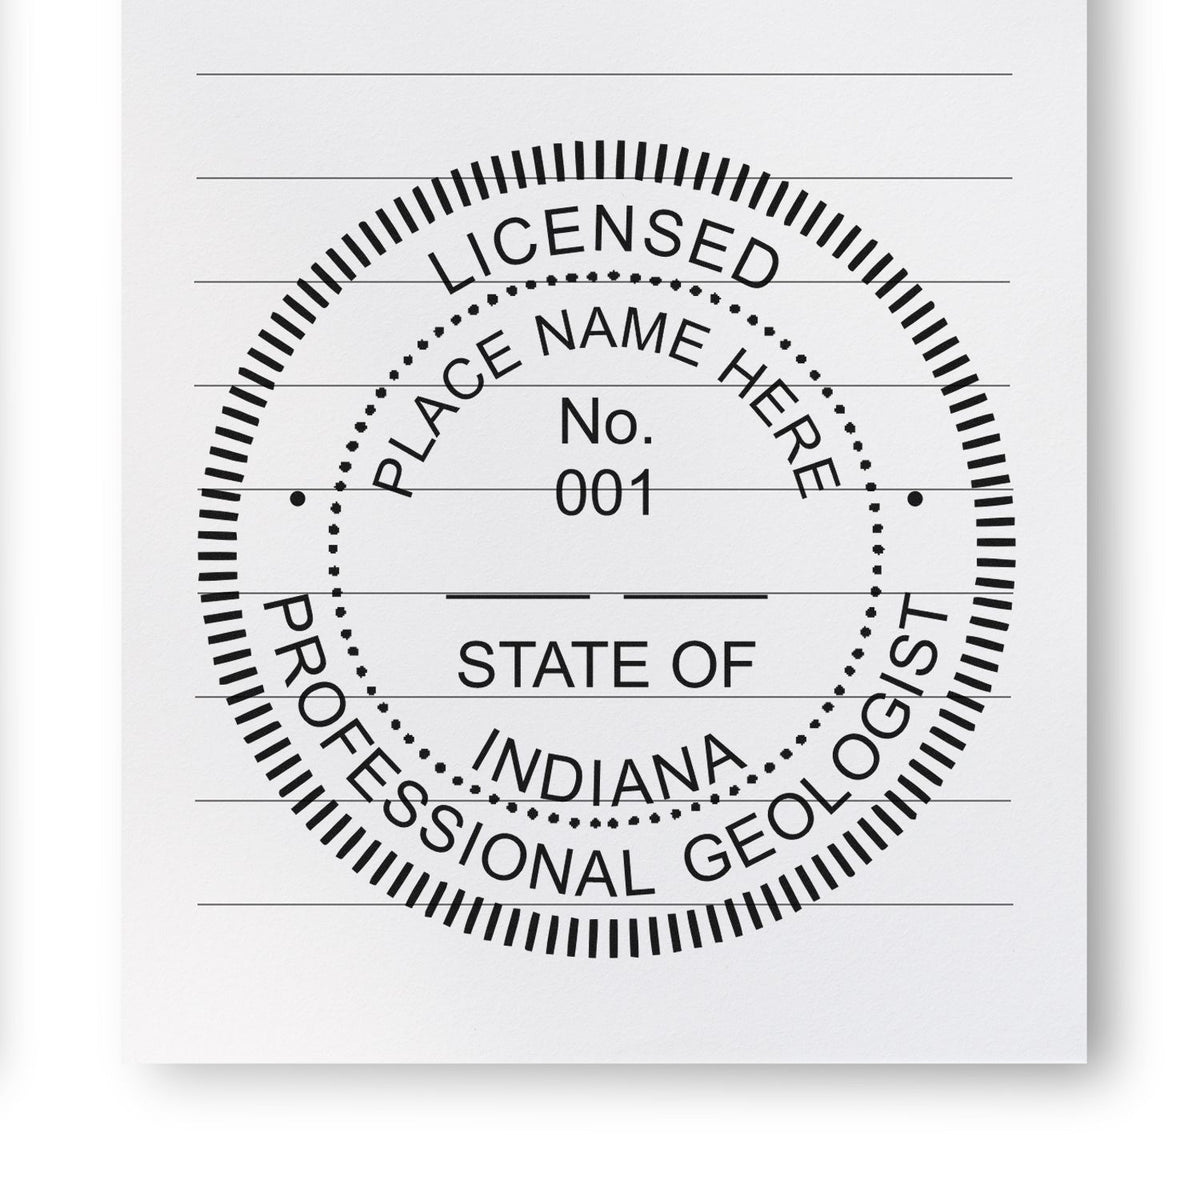 A photograph of the Digital Indiana Geologist Stamp, Electronic Seal for Indiana Geologist stamp impression reveals a vivid, professional image of the on paper.